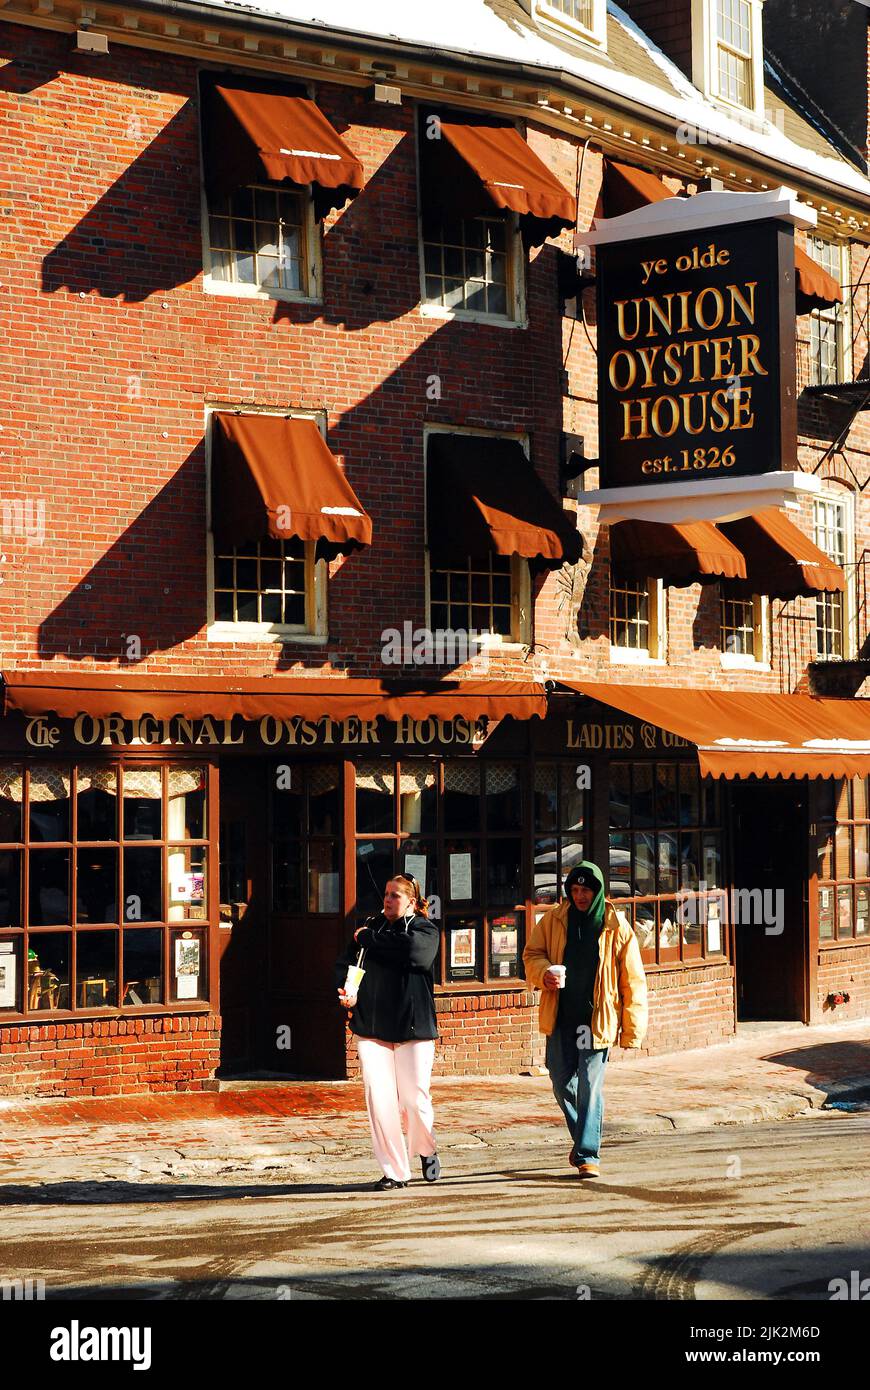 Two people cross the street on a cold winter’s day in front of the historic Oyster House in Boston Stock Photo